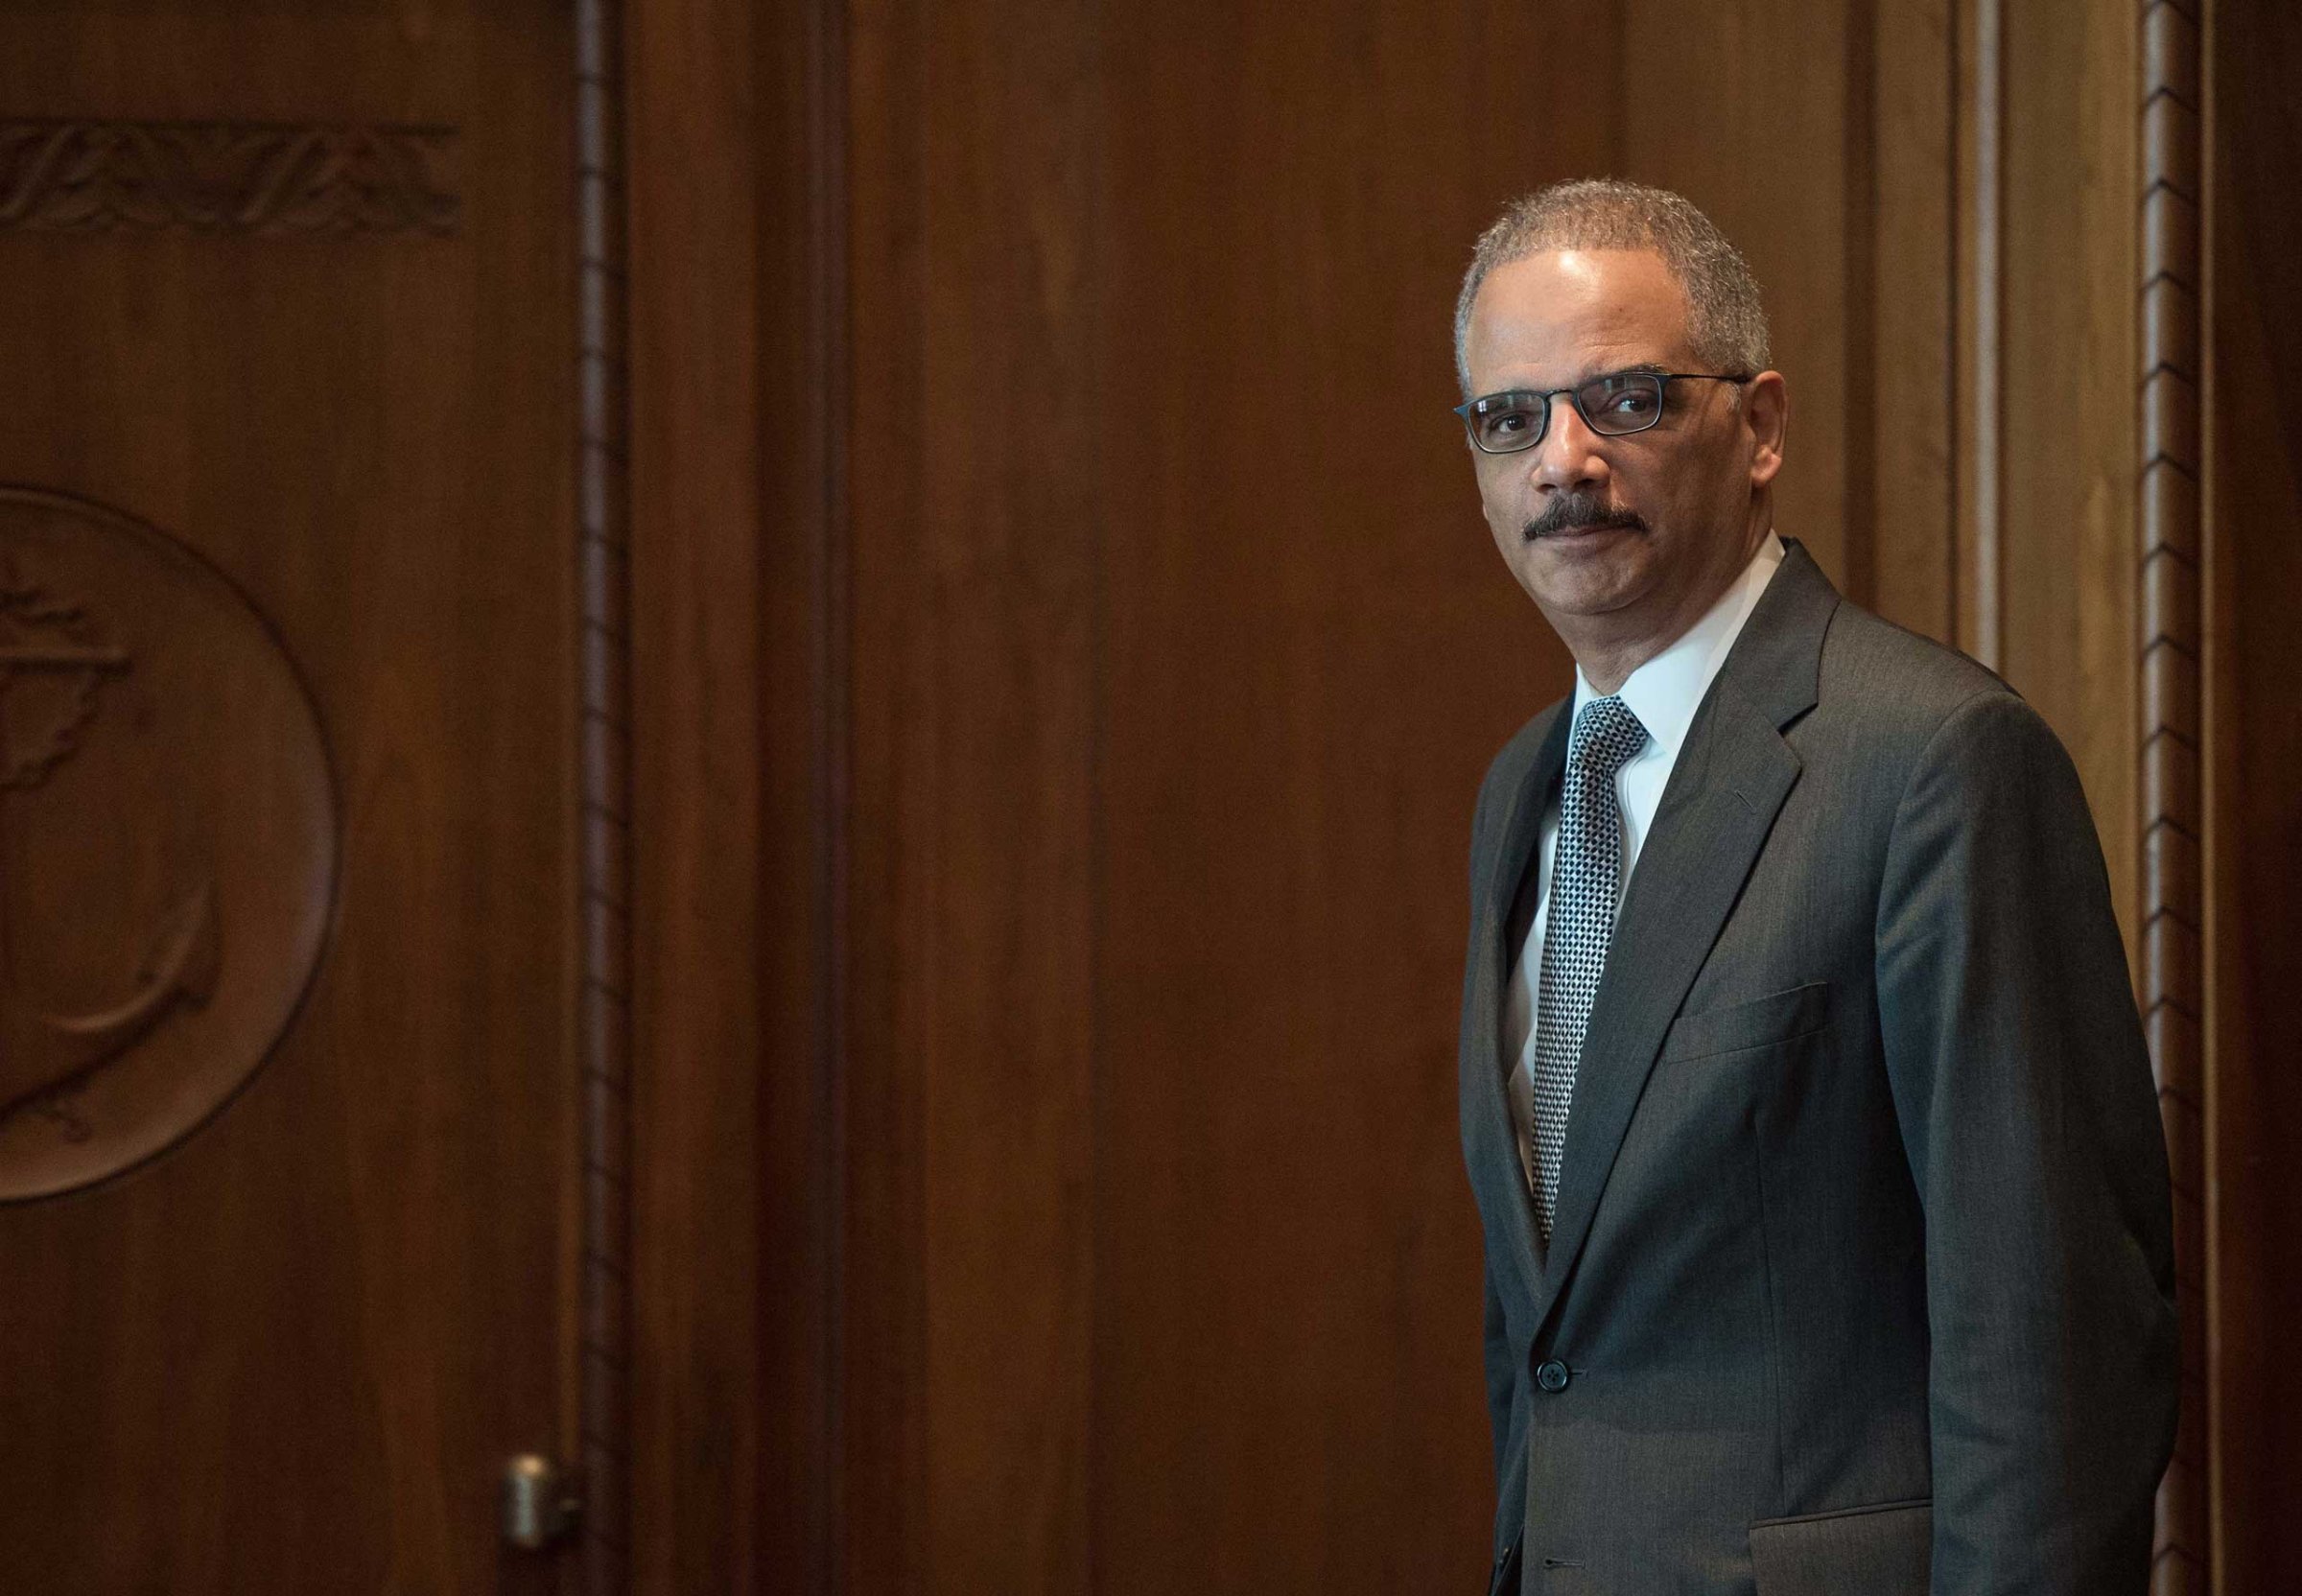 US Attorney General Eric Holder arrives for a meeting with French Interior Minister Bernard Cazeneuve at the Justice Department in Washington on Feb. 19, 2015.